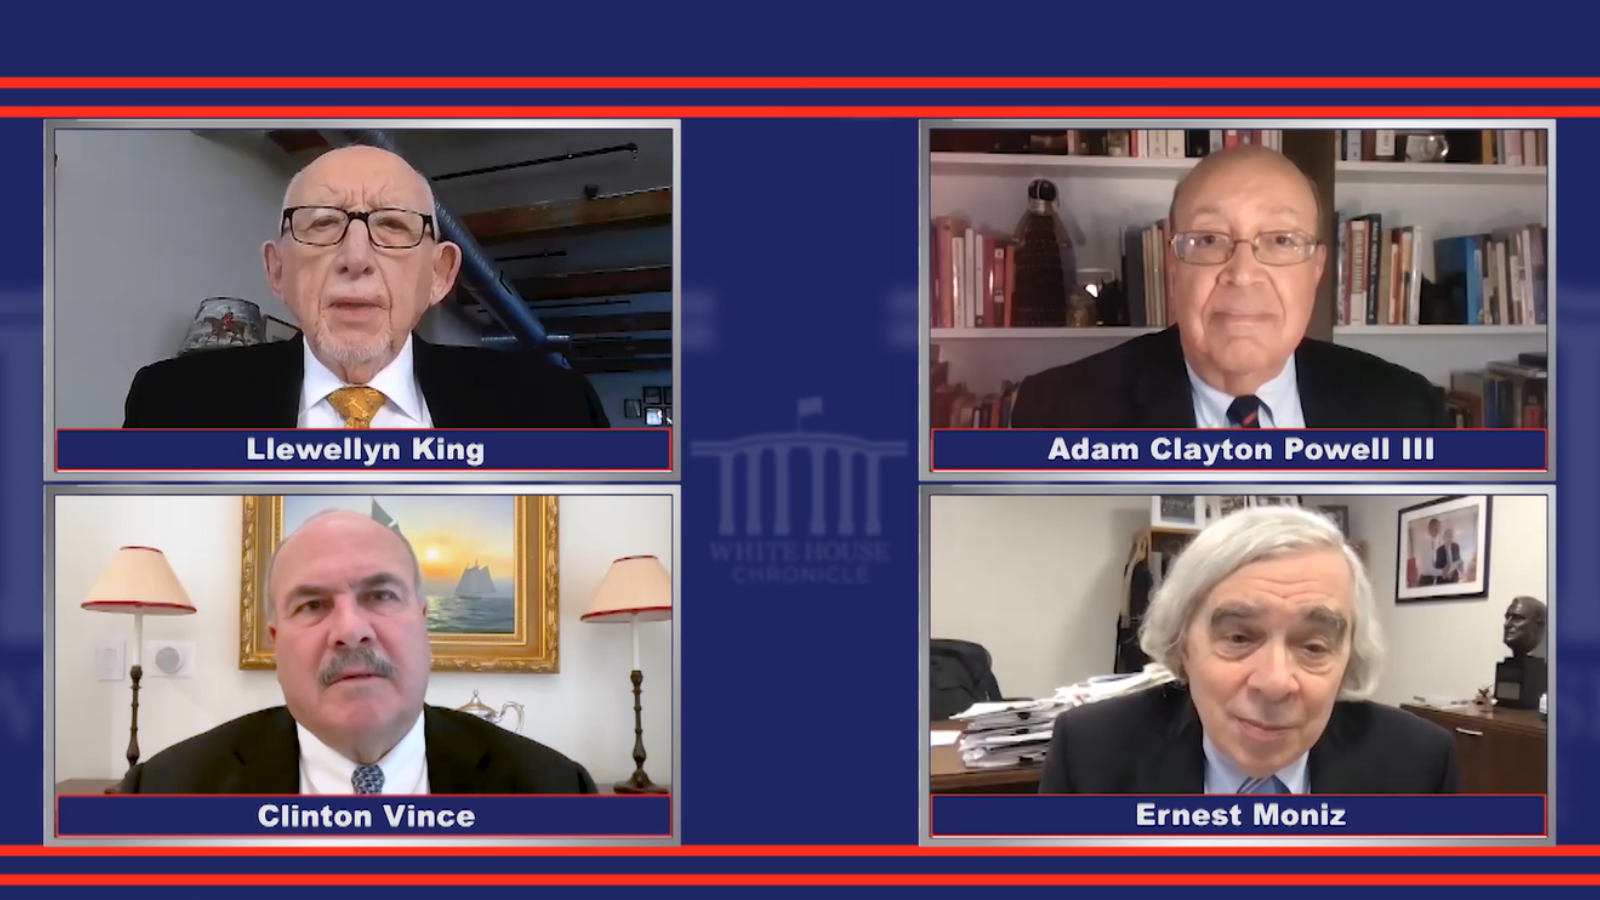 Top left to bottom right: Llewellyn King (White House Chronicle); Adam Clayton Powell III (White House Chronicle); Clinton Vince (Dentons); and Ernest Moniz (EFI Foundation) discuss the Hydrogen Demand Initiative on the PBS show White House Chronicle.